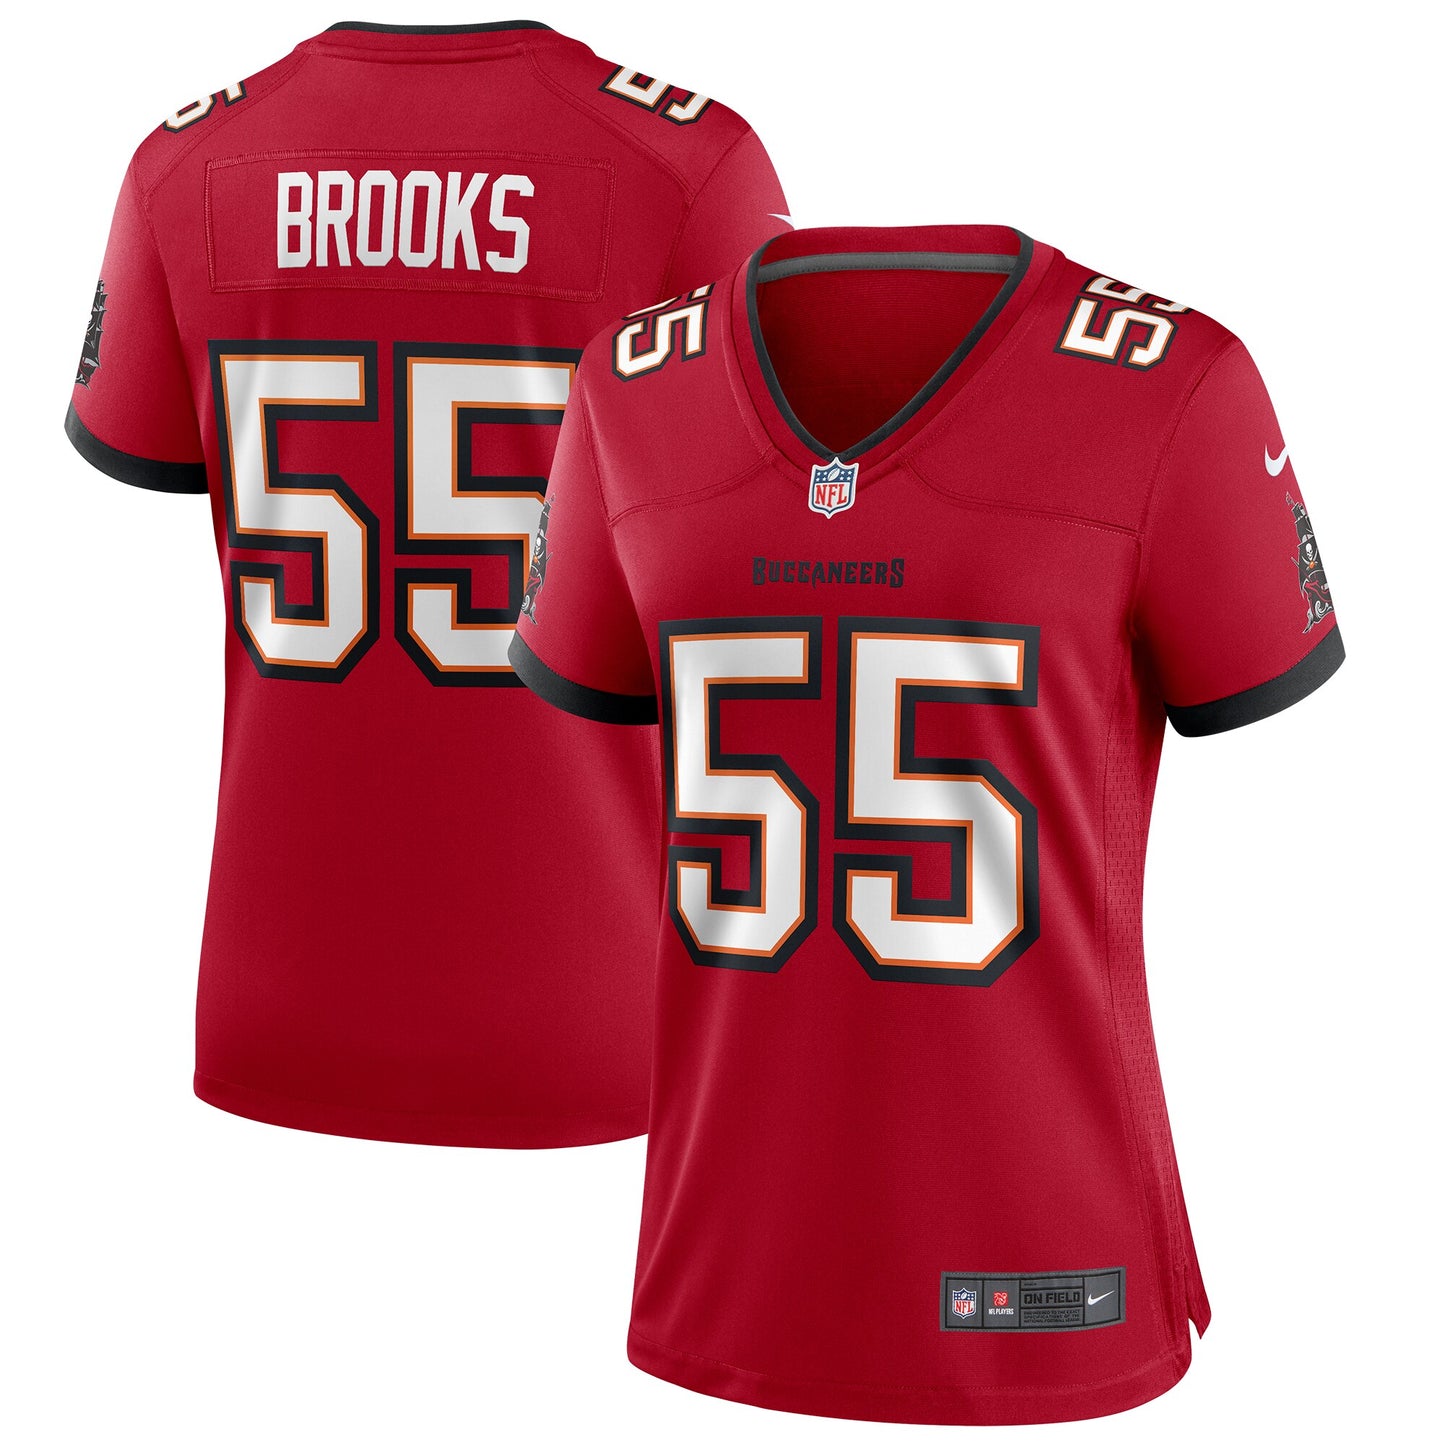 Derrick Brooks Tampa Bay Buccaneers Nike Women's Game Retired Player Jersey - Red